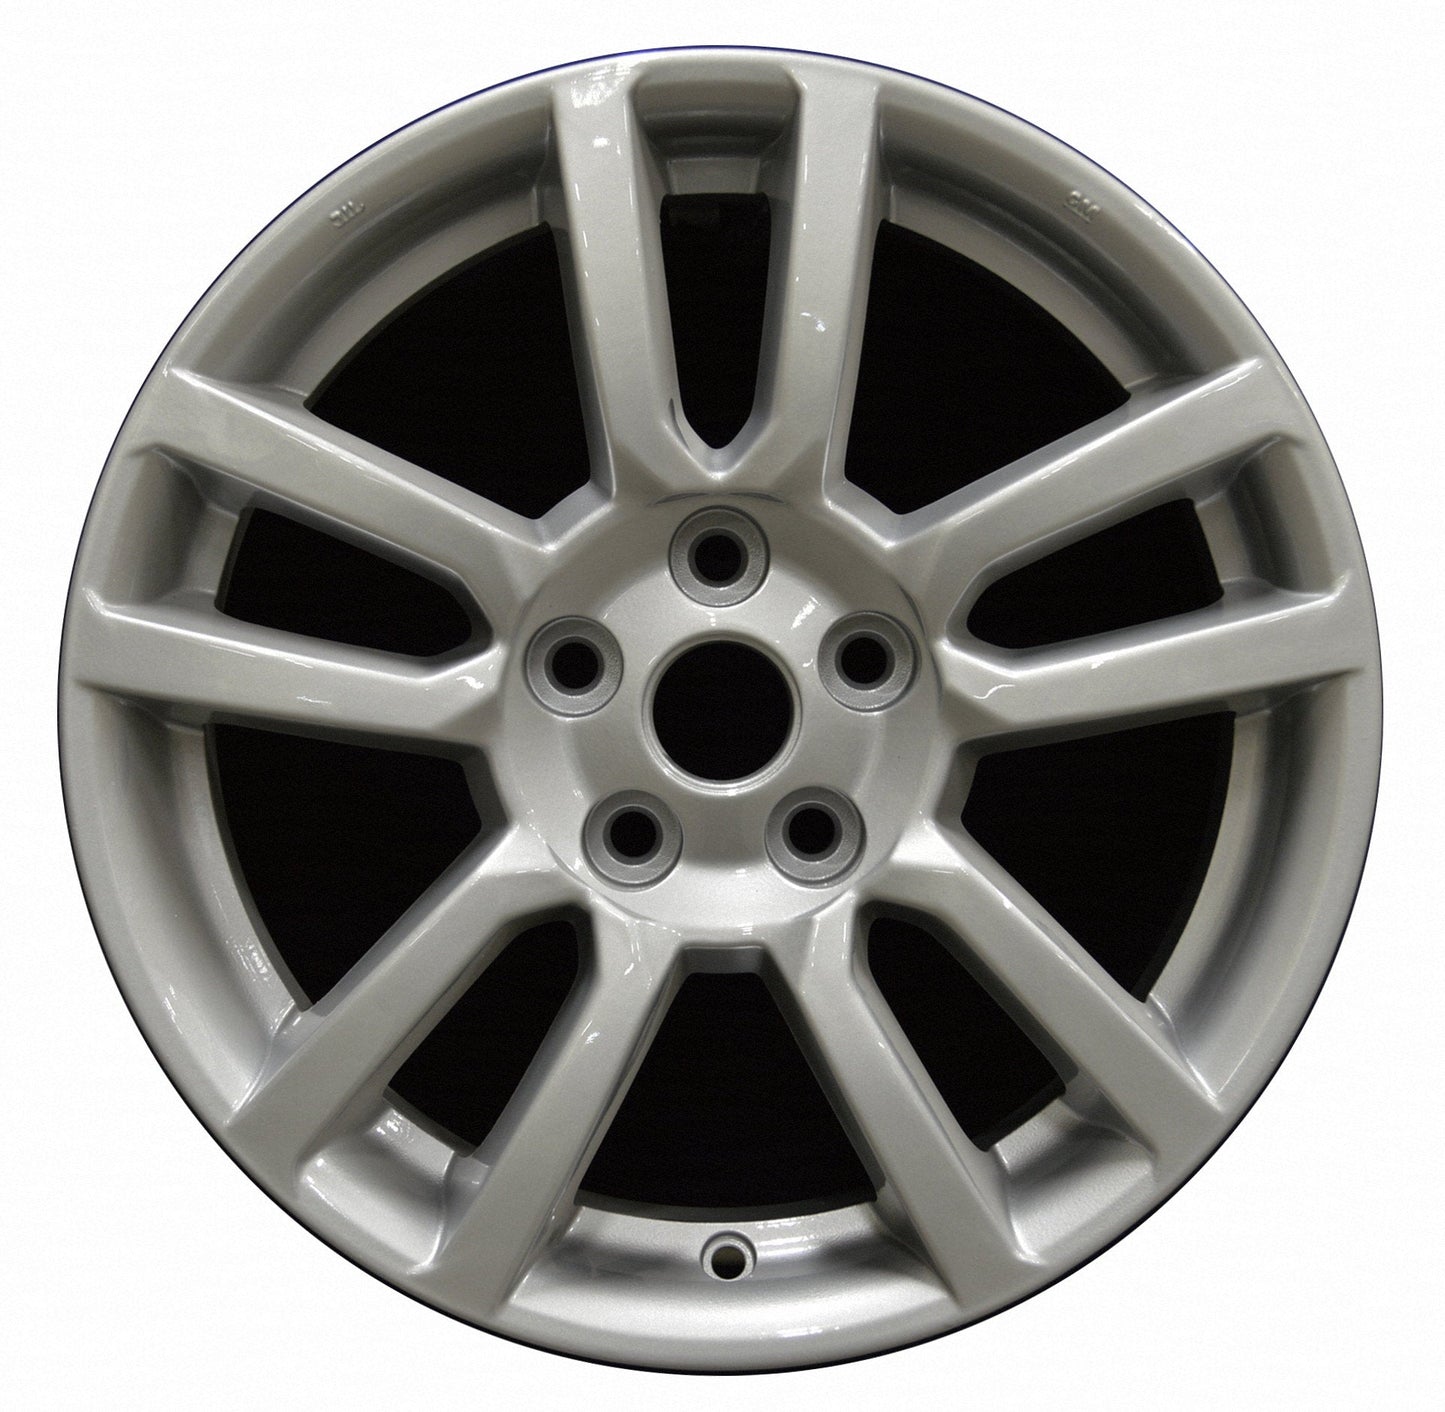 Chevrolet Sonic  2012, 2013, 2014, 2015, 2016 Factory OEM Car Wheel Size 16x6 Alloy WAO.5525.PS06.FF